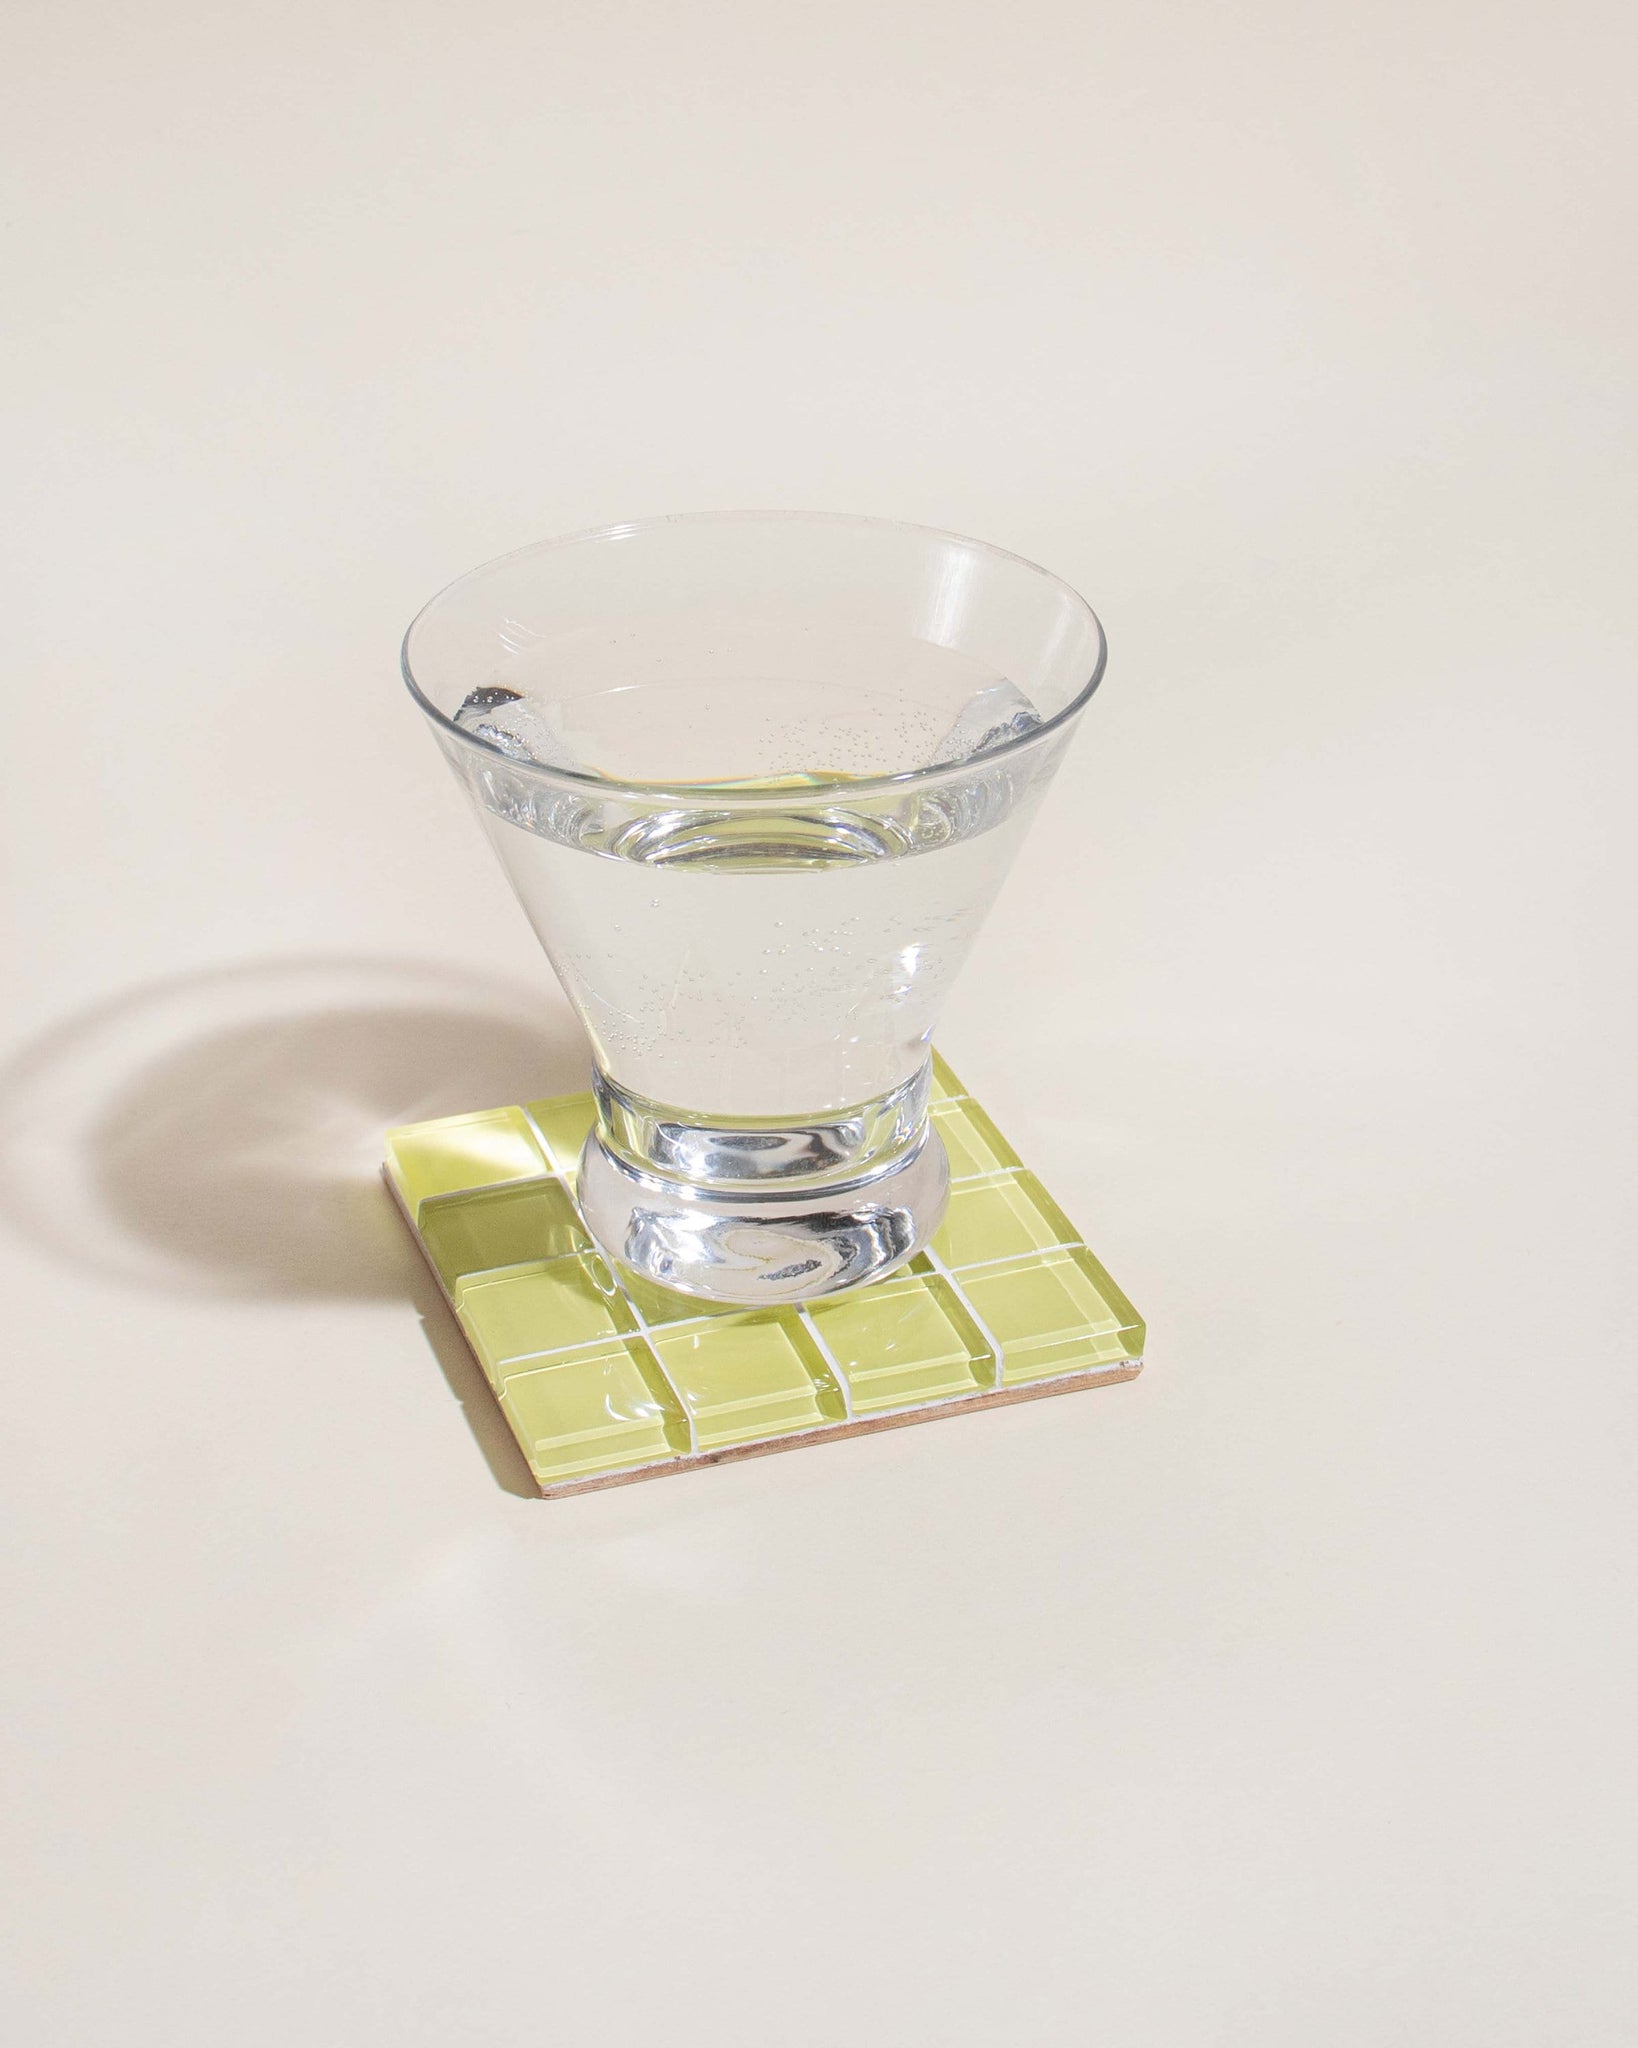 Glass Tile Coaster | Handmade Drink Coaster | Square Coaster | Housewarming Gift | Gift for Her | Gift for Him | Birthday Gifts 4